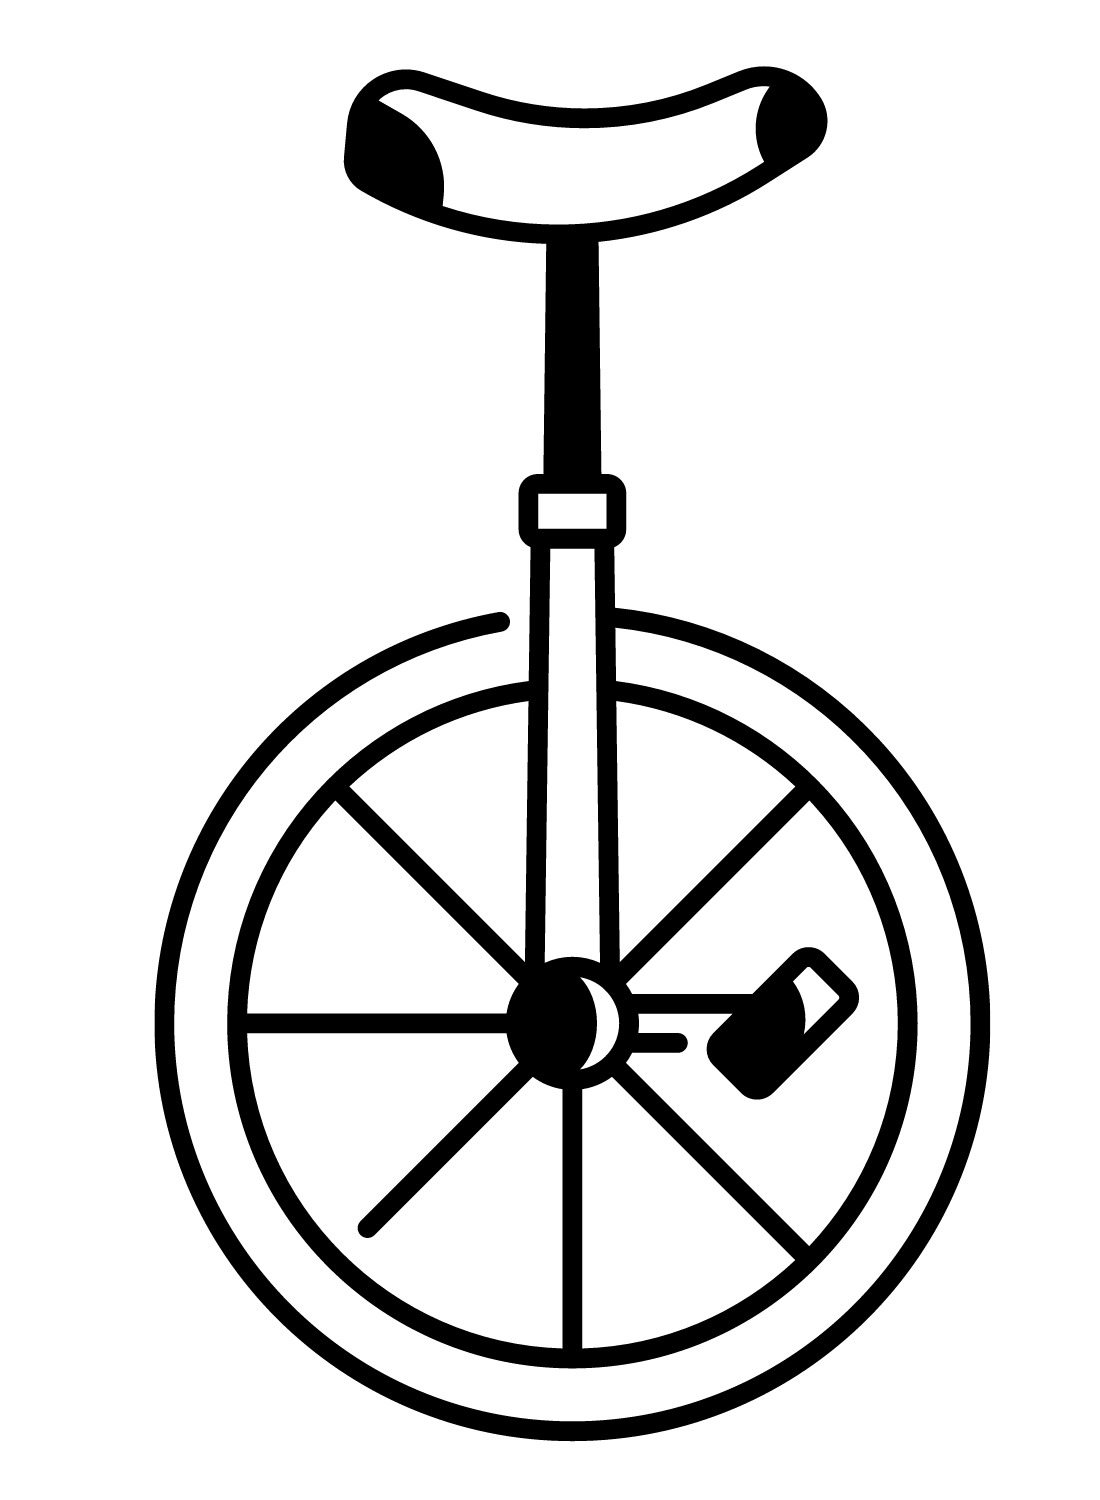 Unicycle to Print Coloring Page